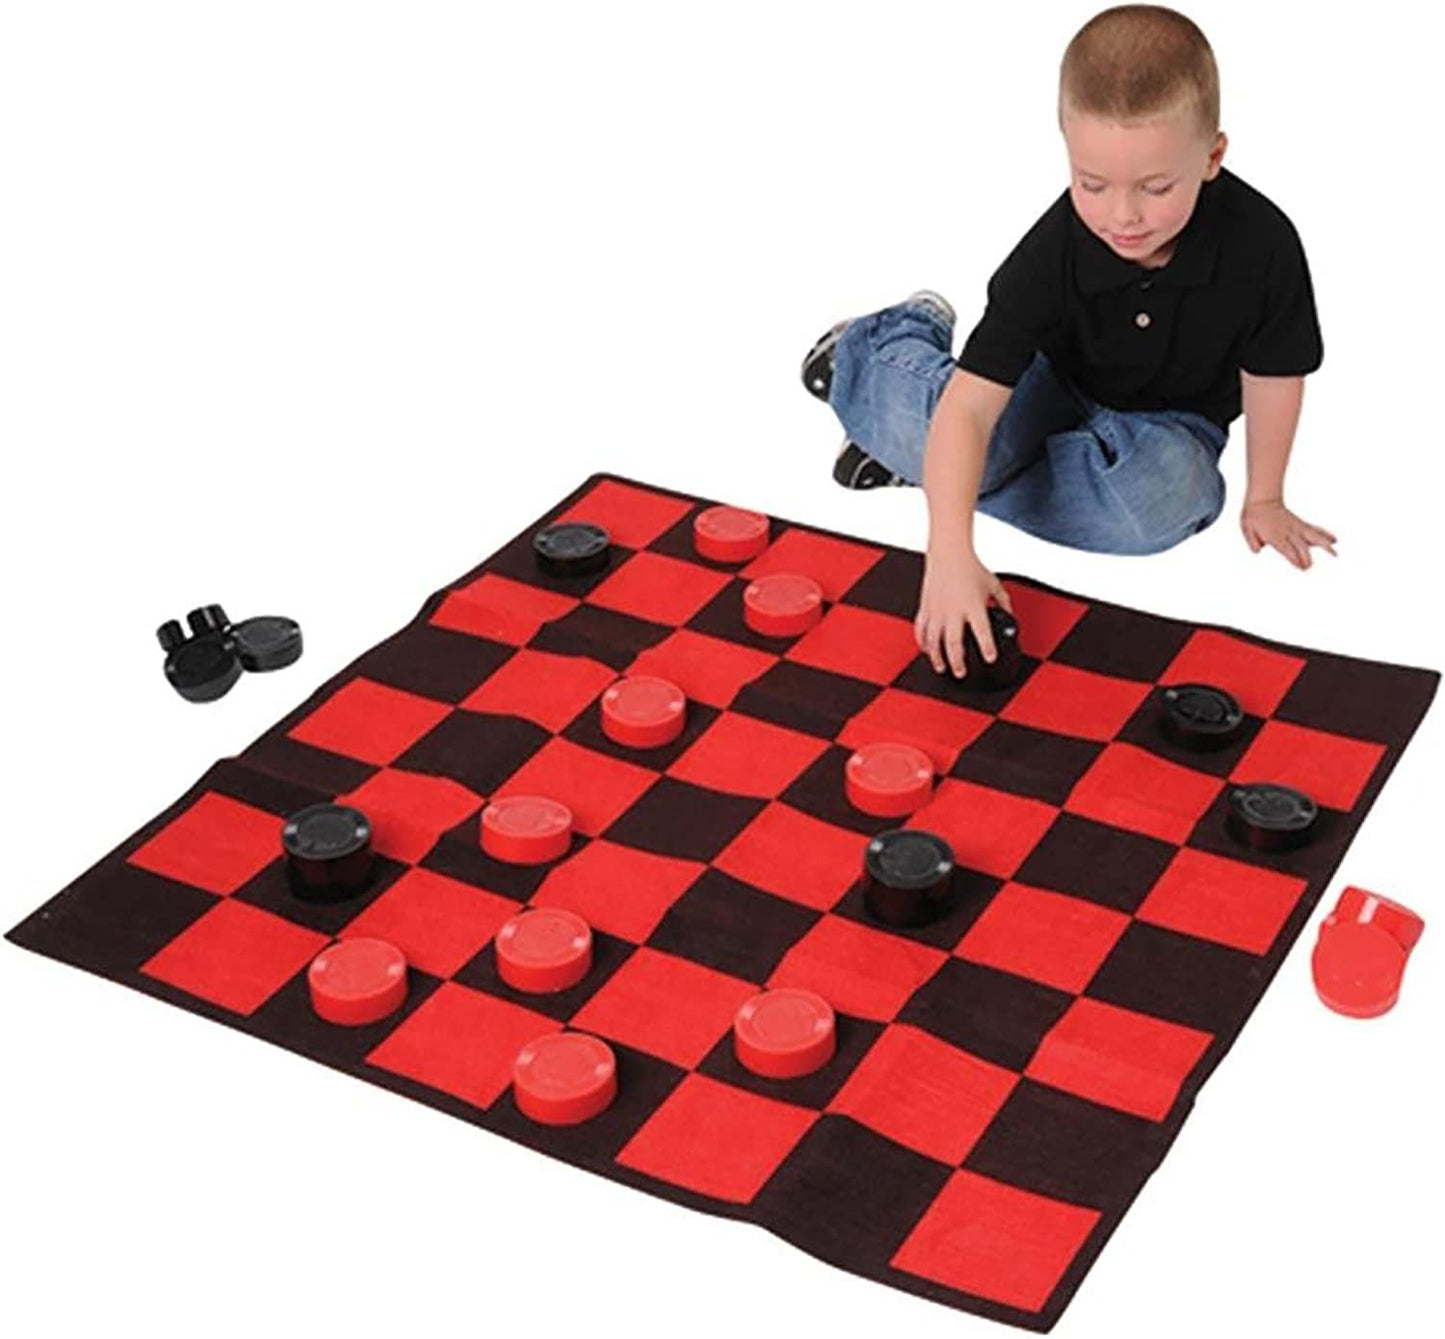 Giant Checkers Rug Set by Gamie - 34.5 x 34.5 Inch Jumbo Checker Board Floor Mat Game with Huge Pieces - Great Gift Idea for Boys and Girls, Fun Birthday Party Activity - Play Room Rug - Red and Black